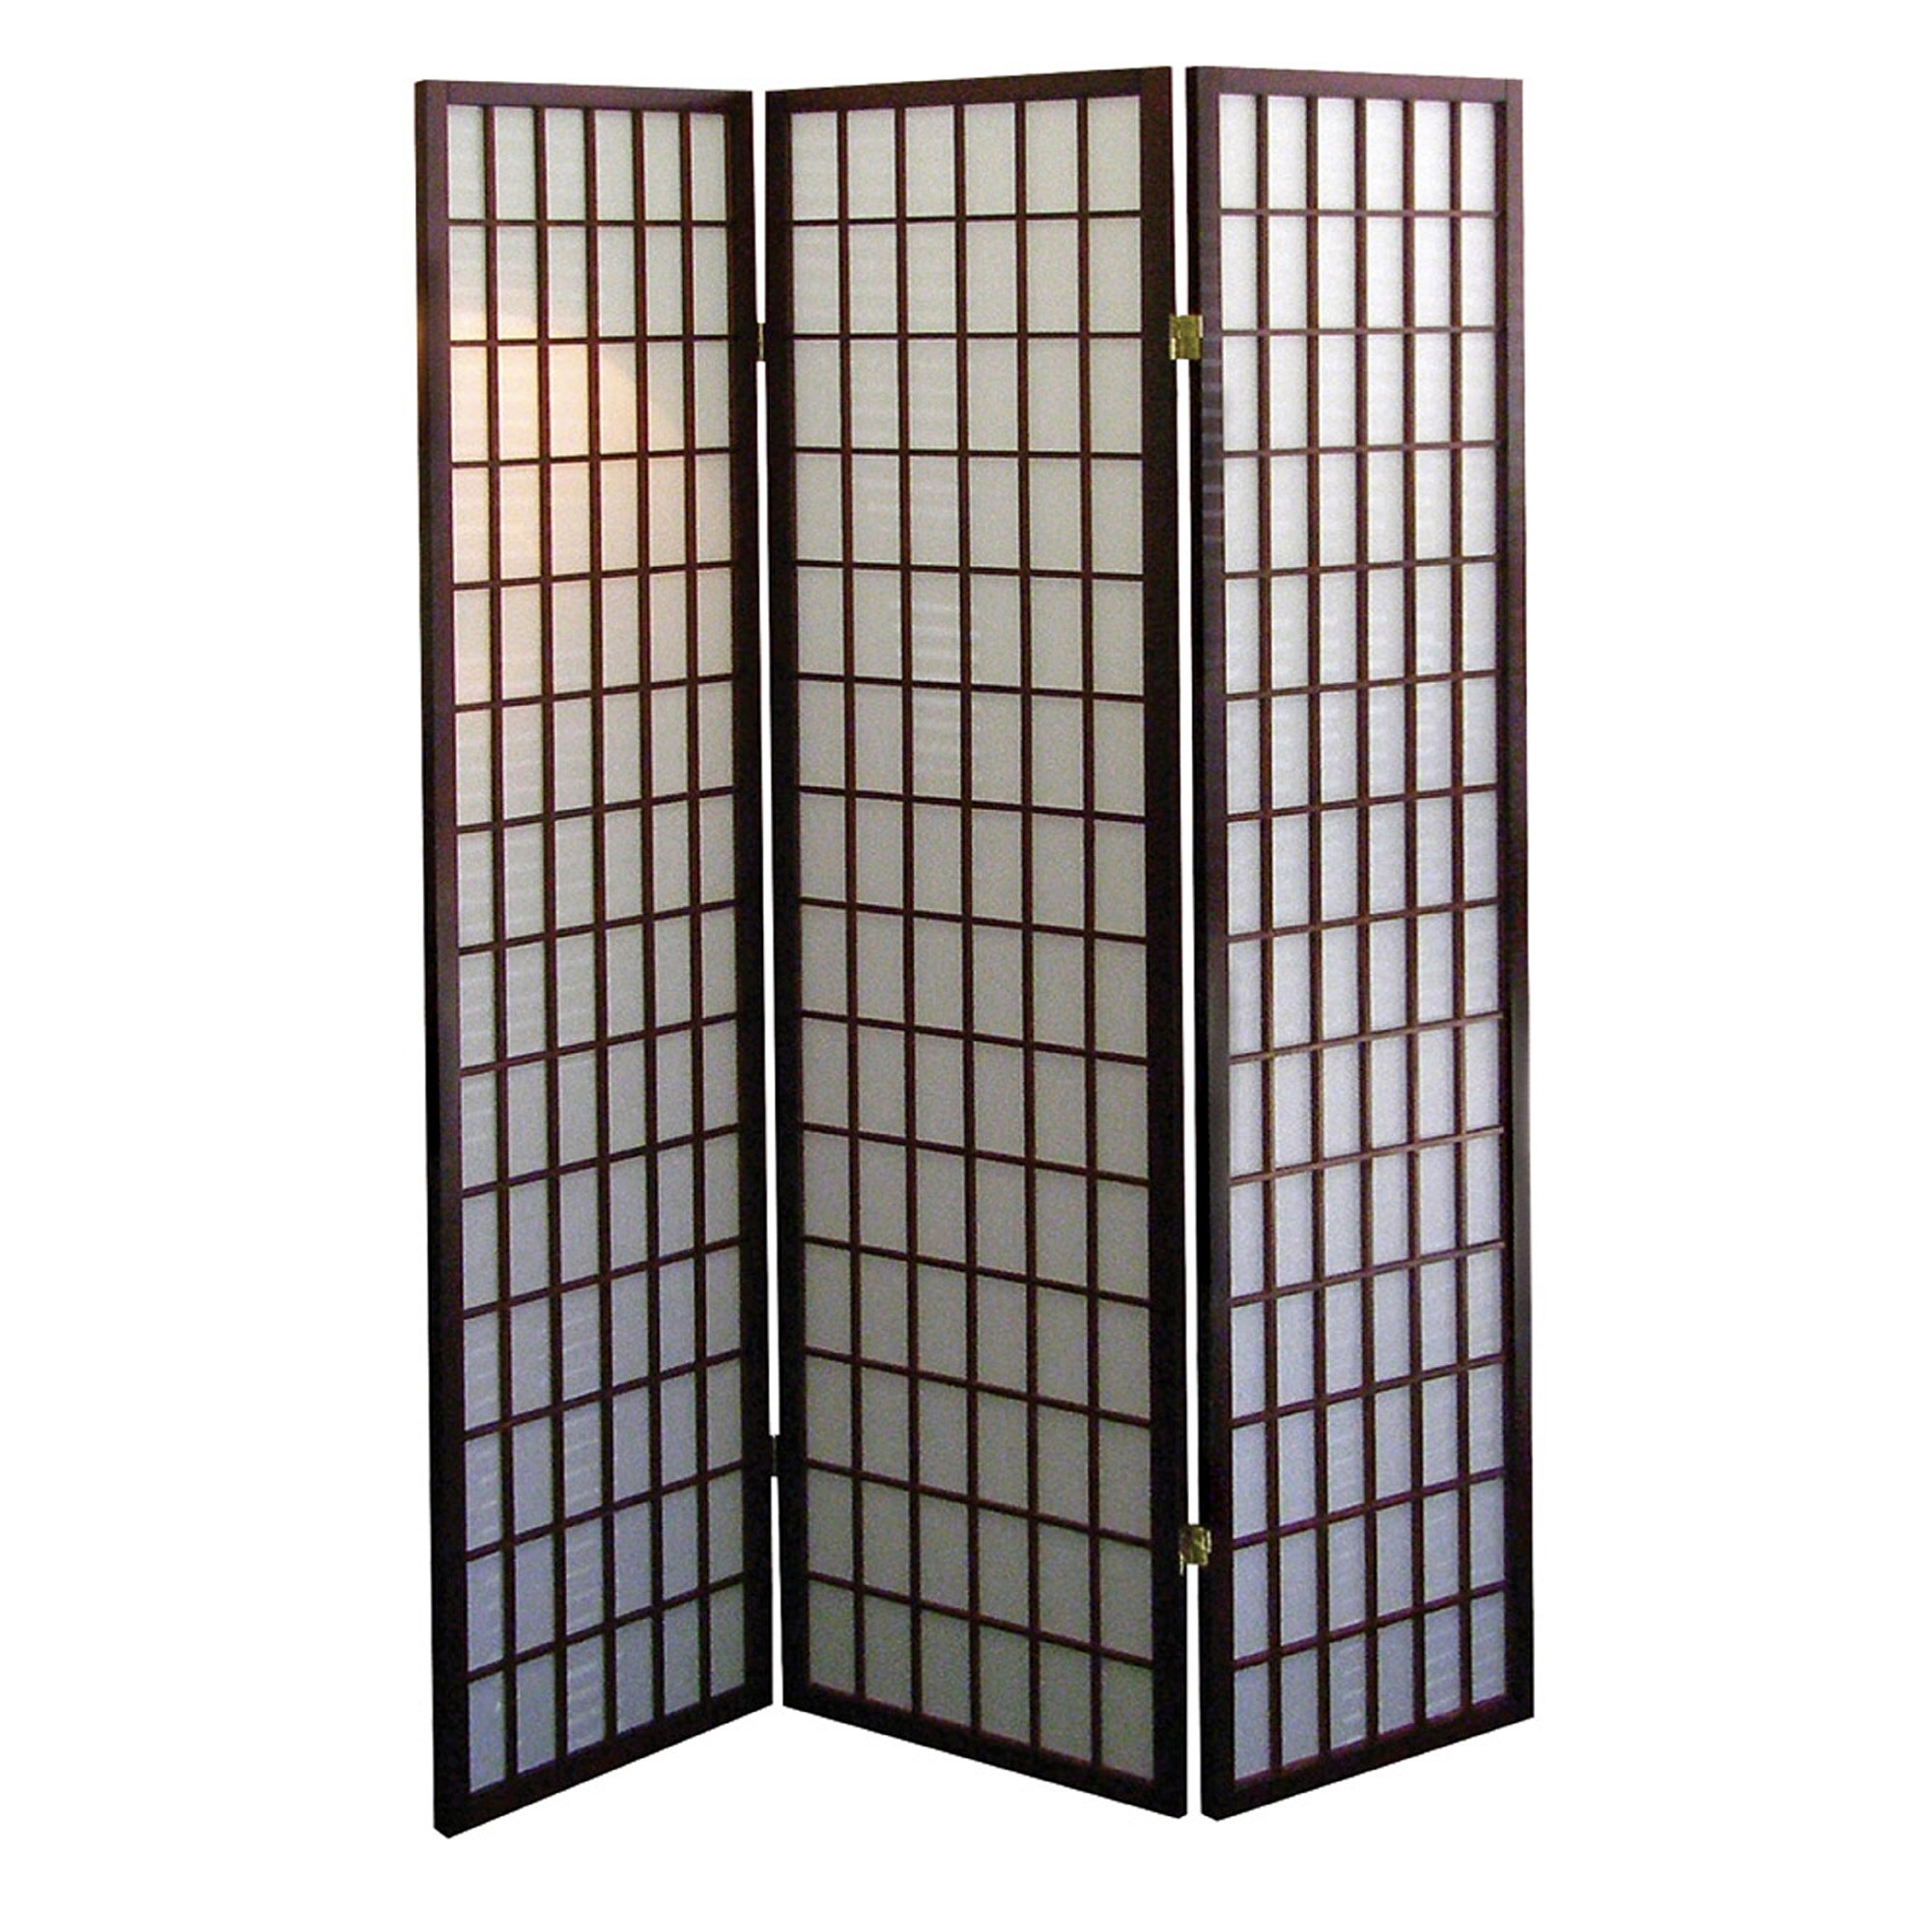 Details about   Cherry finsh 3 panel room divider screen with floral design 